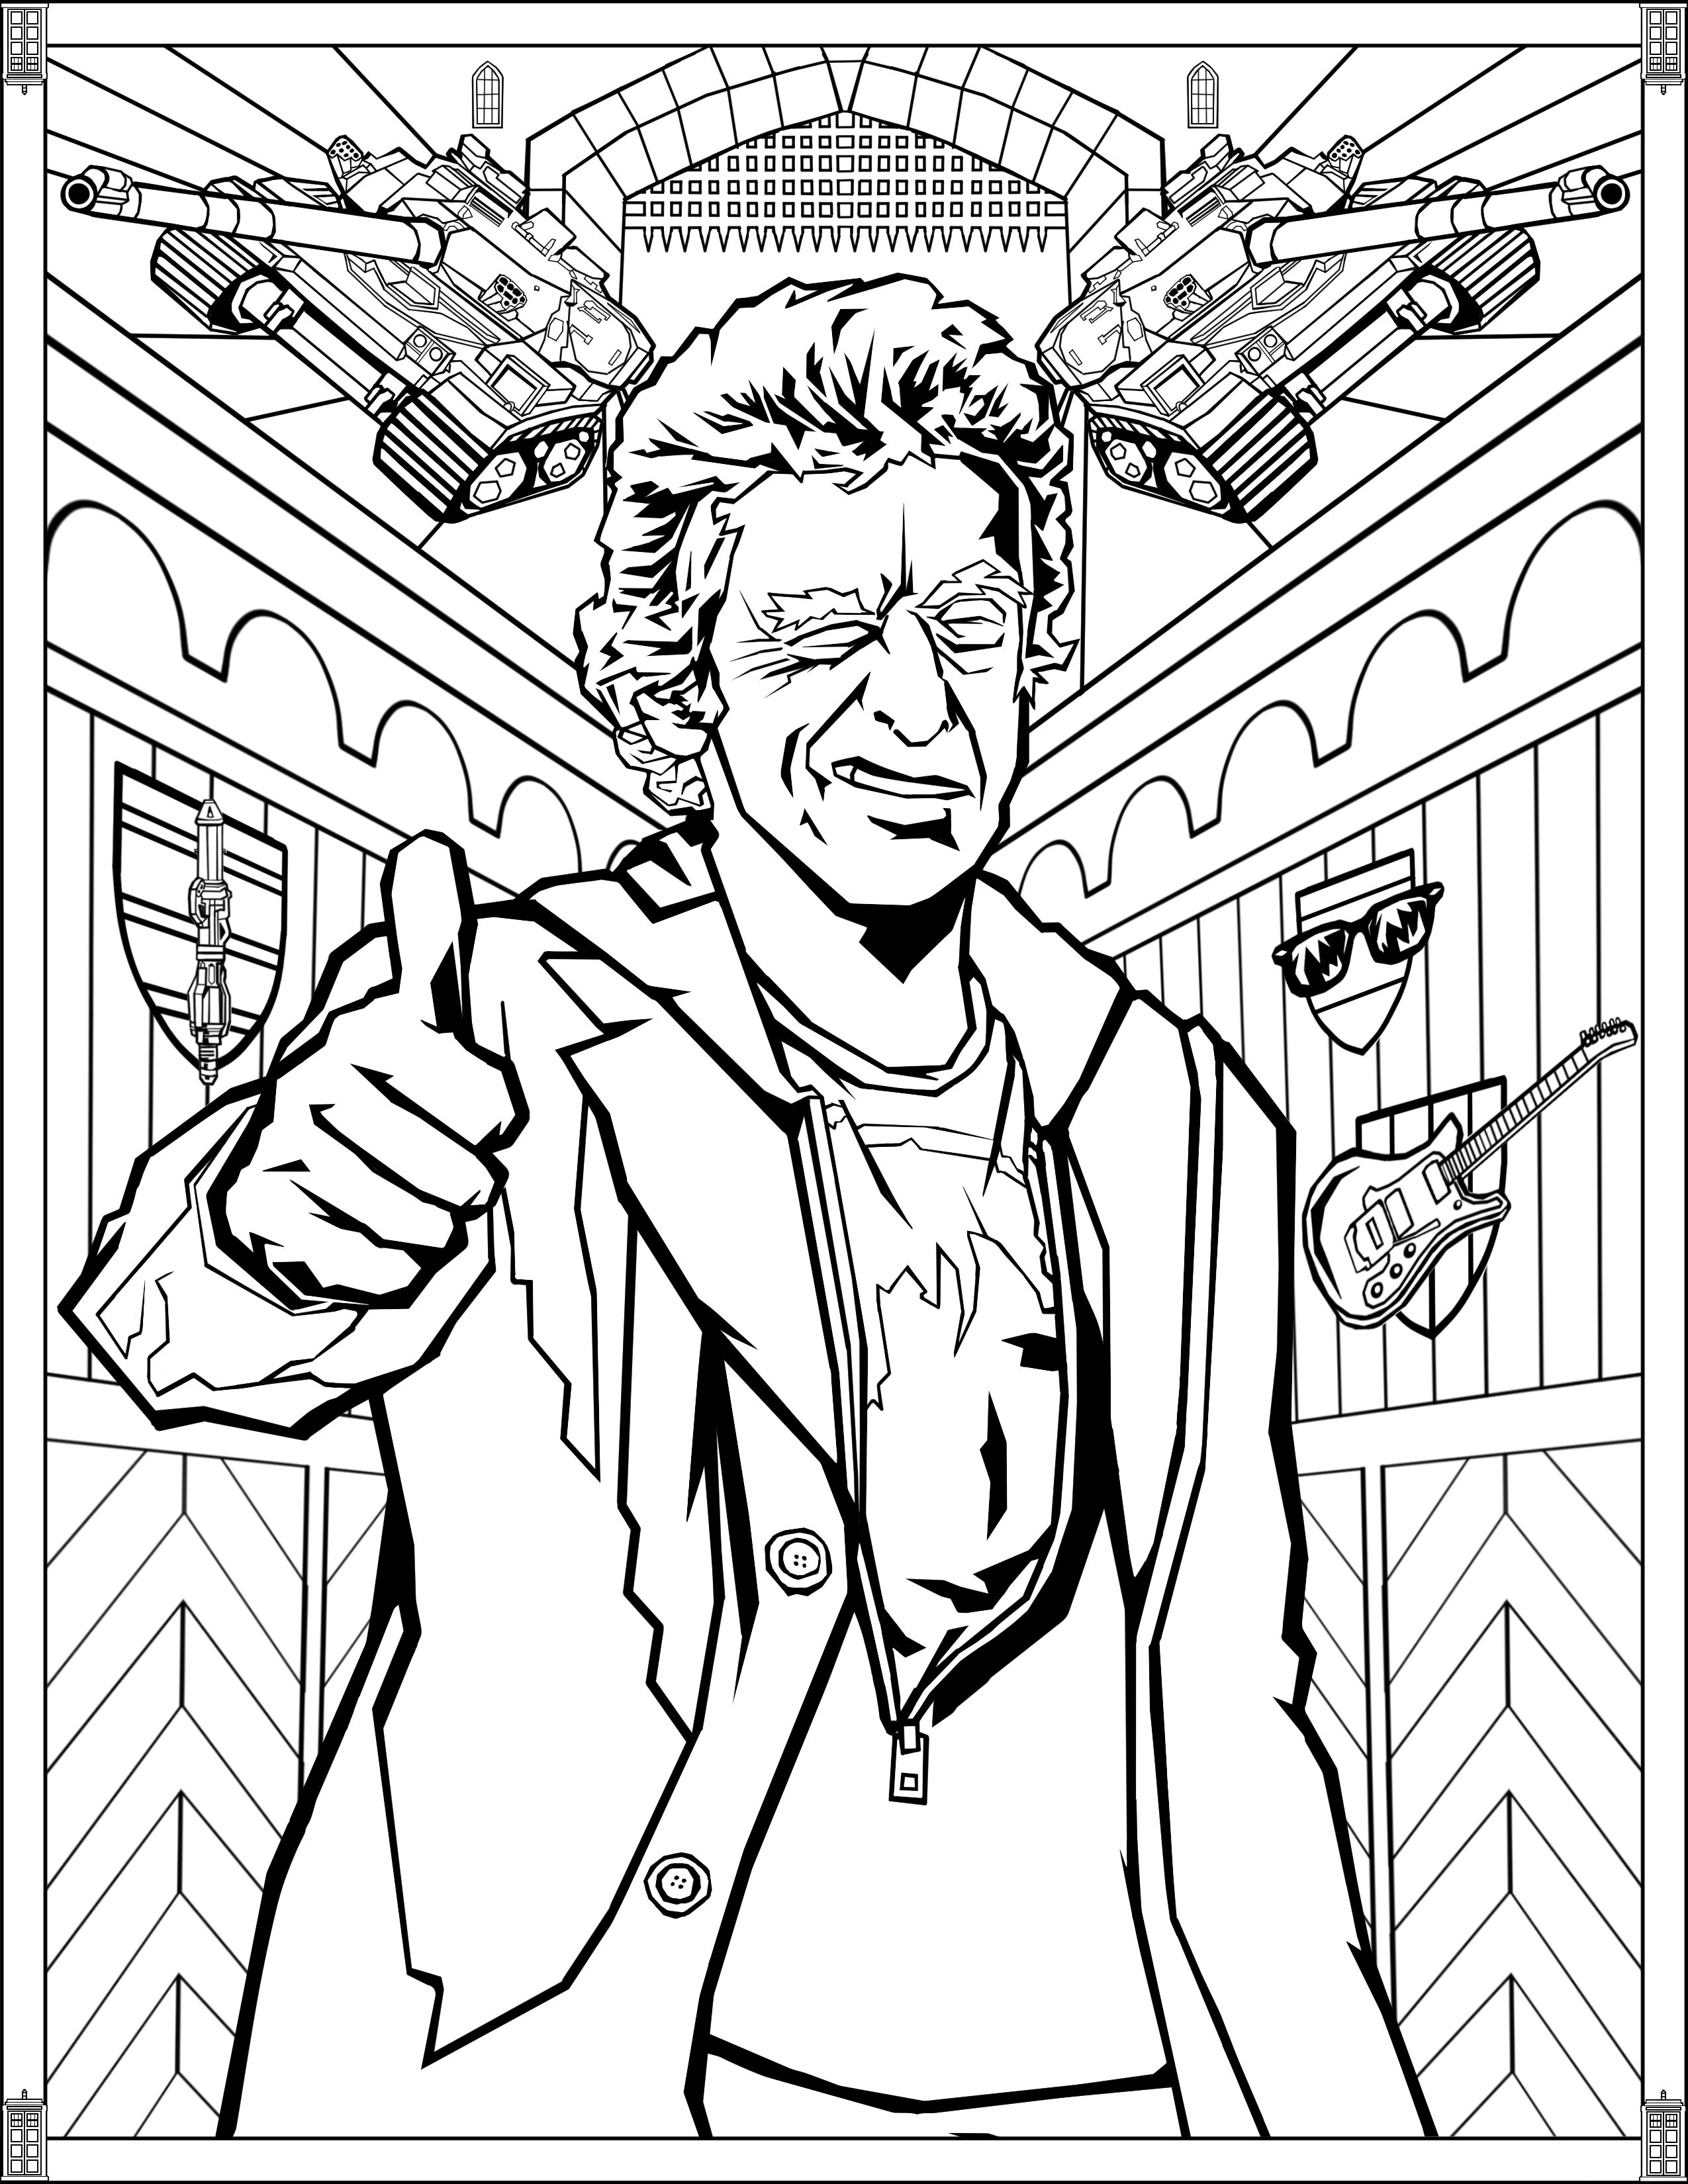 Doctor Who Coloring Page Doctor Who Wibbly Wobbly Timey Wimey Coloring Pages Printables